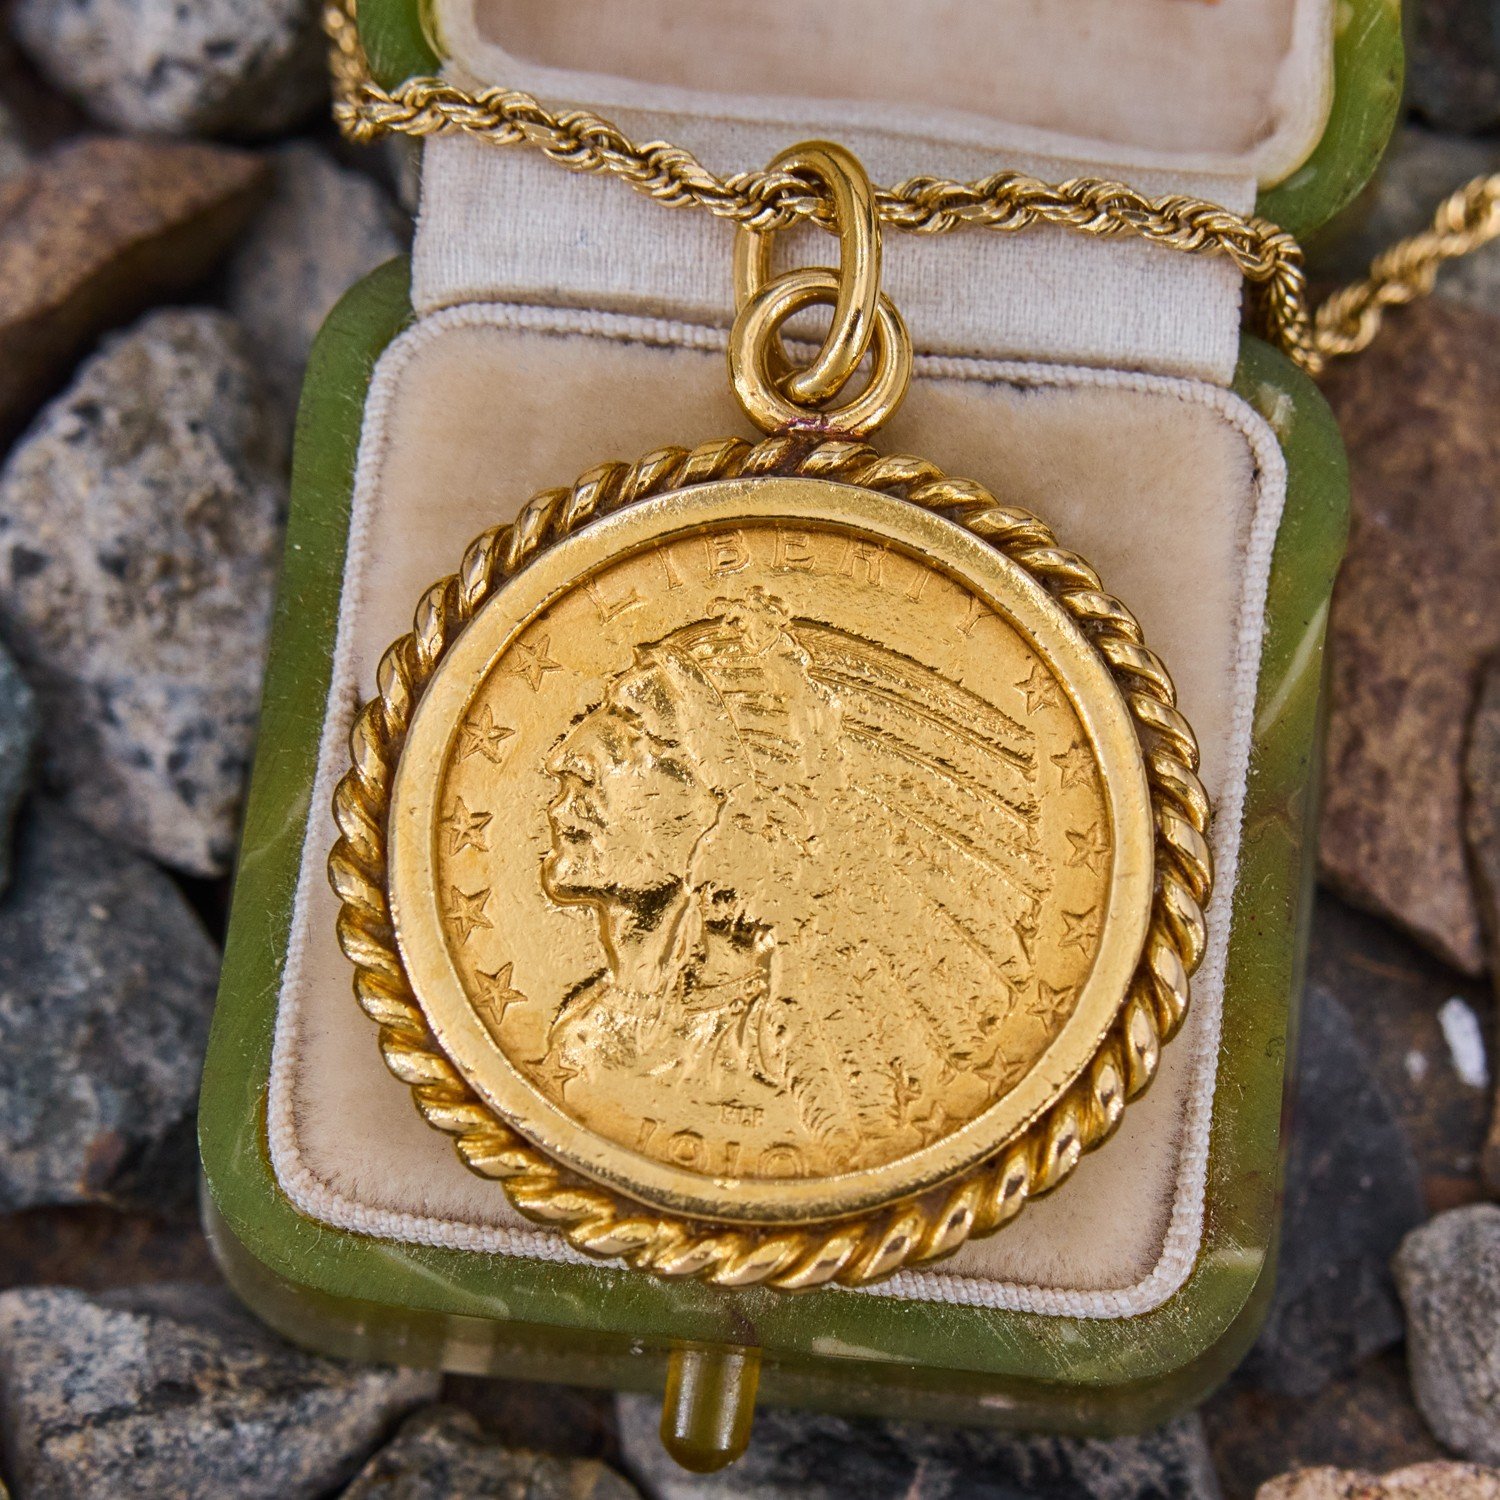 24K 995 Pure Gold Byzantine Coins Necklace for Women - 1-1-GN-V00634 in  50.260 Grams